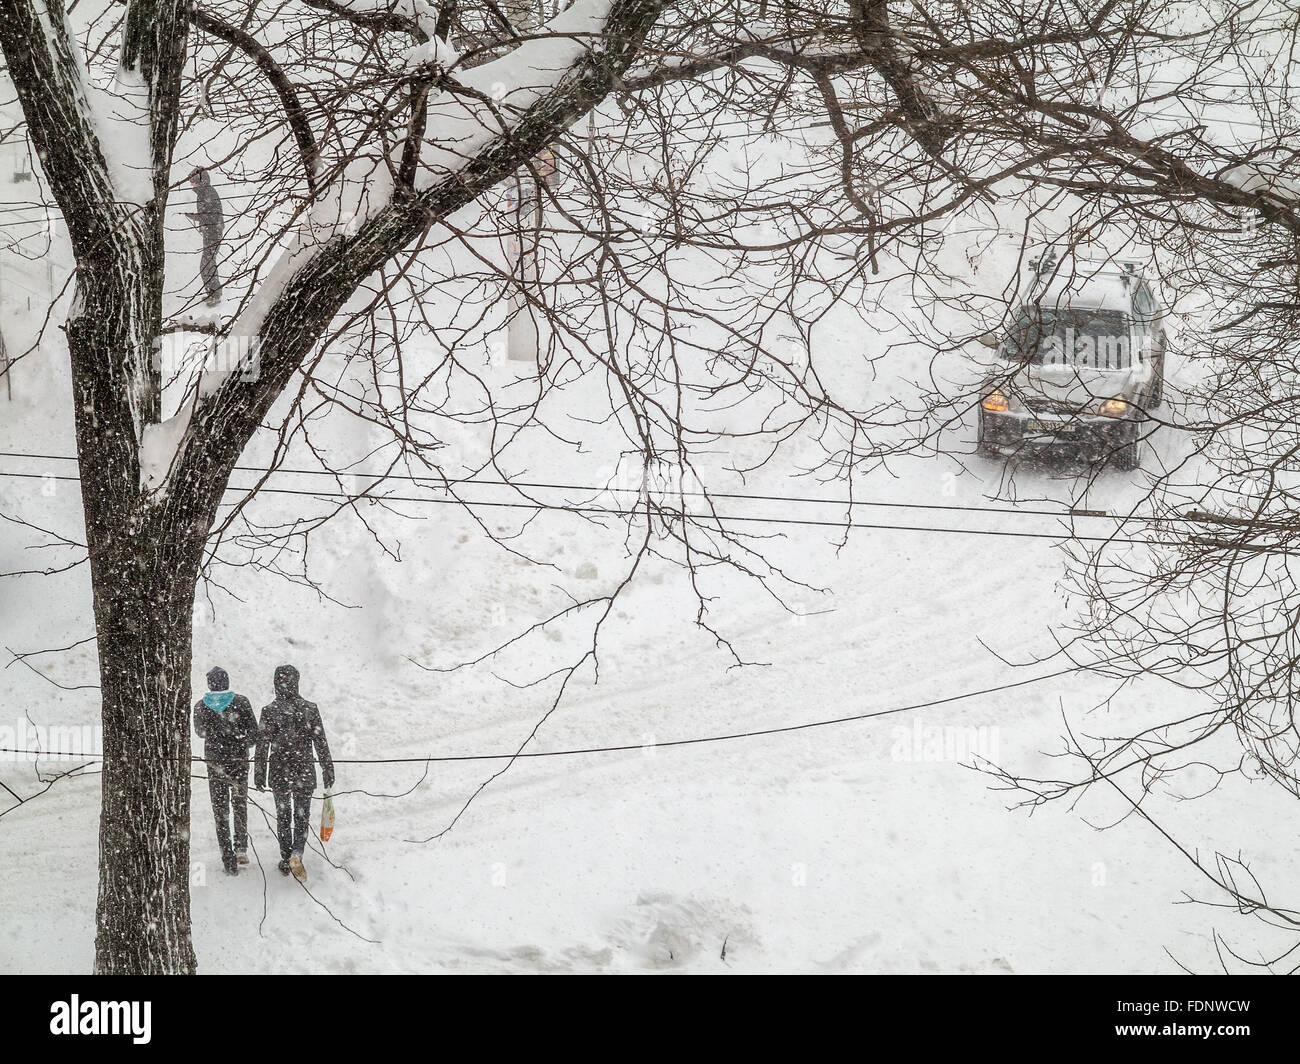 Odessa, Ukraine - January 18, 2016: A powerful cyclone, storm, heavy snow paralyzed the city. People walking on the street during a snowfall. Stopped Stock Photo